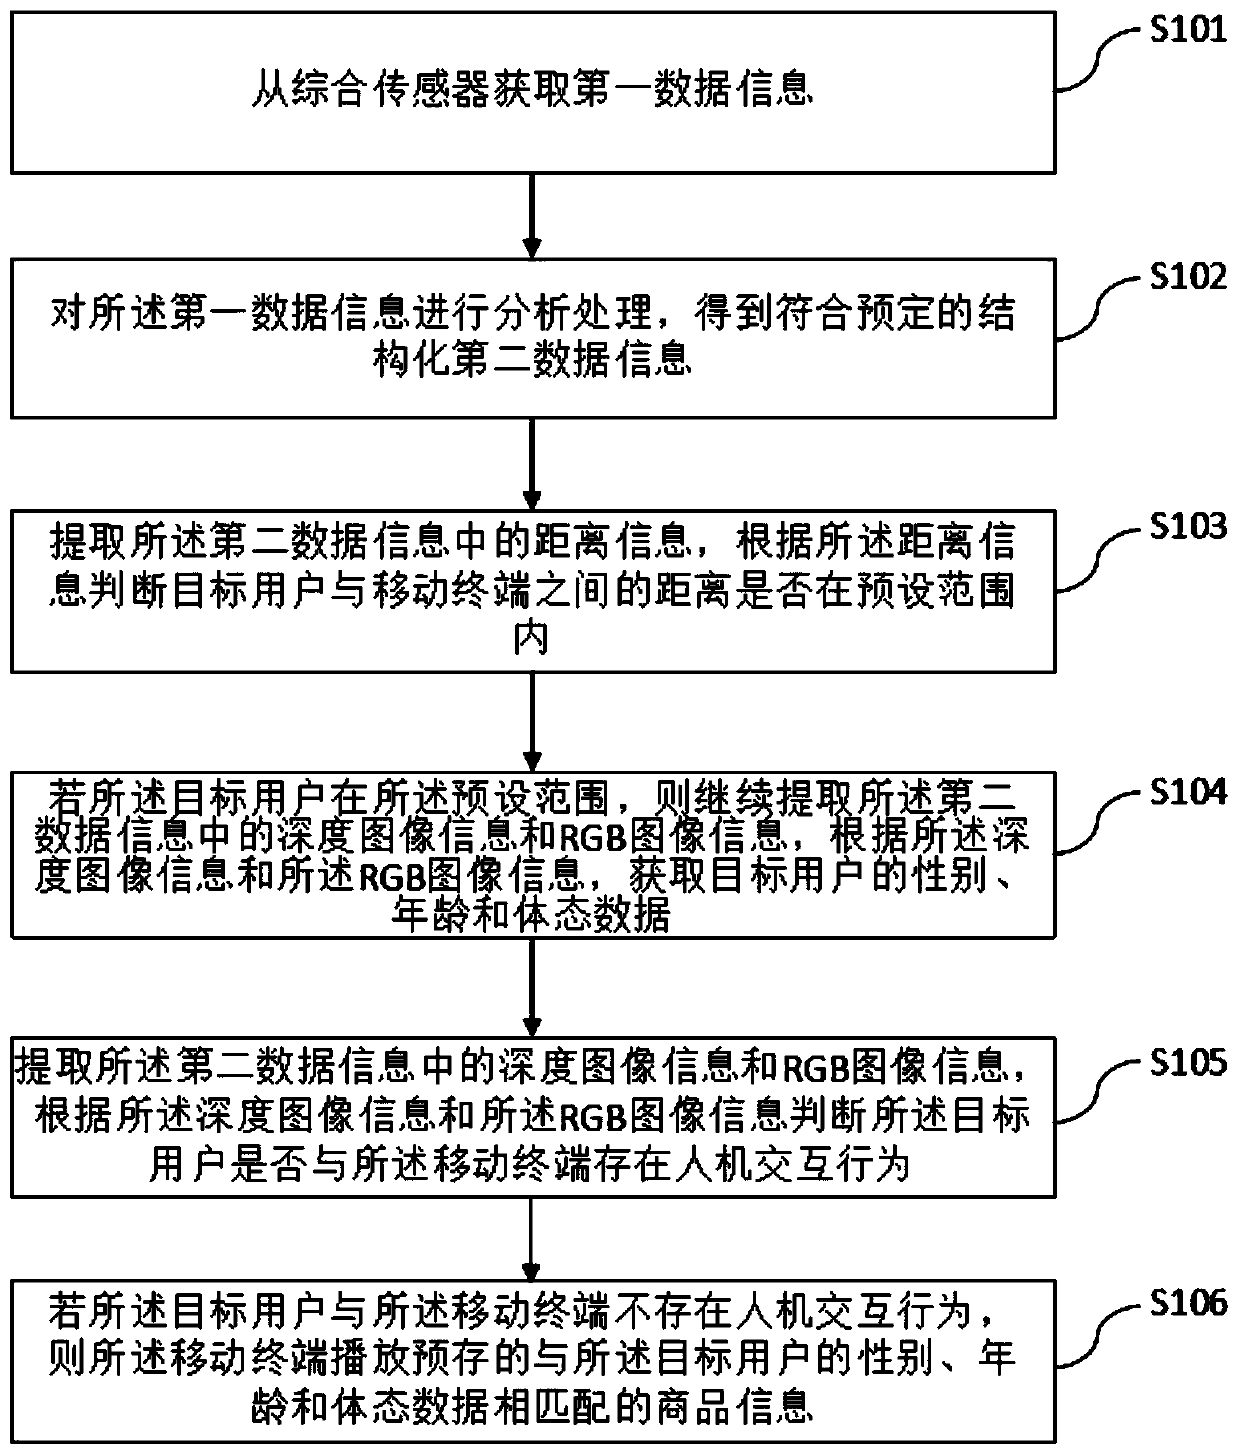 Multi-dimensional data acquisition application method and system